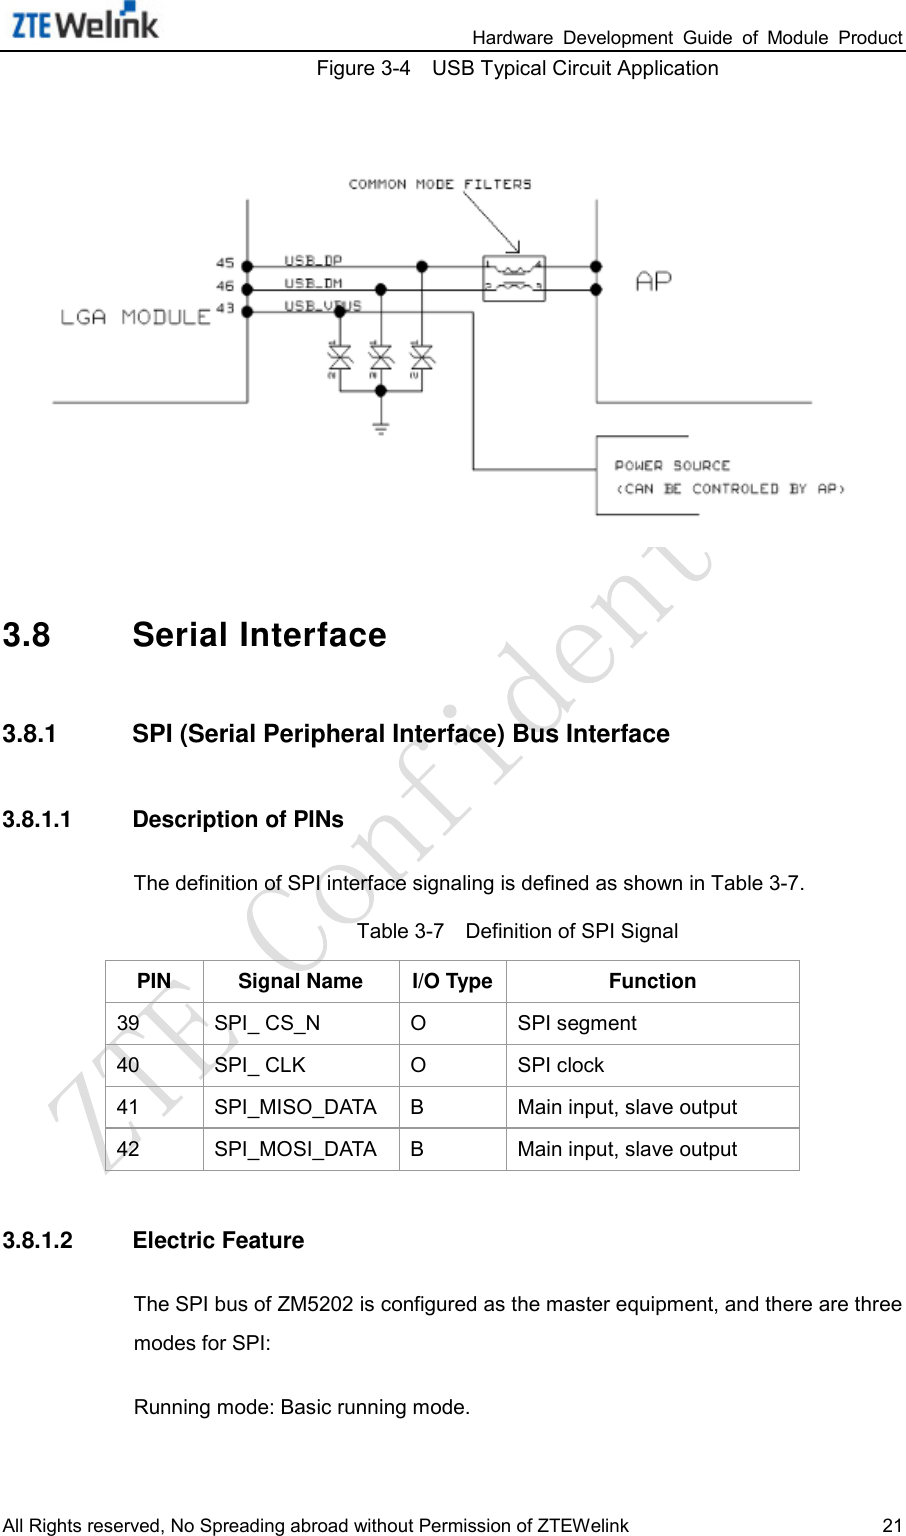                                                                 Hardware  Development  Guide  of  Module  Product All Rights reserved, No Spreading abroad without Permission of ZTEWelink 21 Figure 3-4    USB Typical Circuit Application  3.8 Serial Interface 3.8.1 SPI (Serial Peripheral Interface) Bus Interface 3.8.1.1 Description of PINs The definition of SPI interface signaling is defined as shown in Table 3-7.   Table 3-7    Definition of SPI Signal PIN Signal Name I/O Type Function 39 SPI_ CS_N  O  SPI segment 40 SPI_ CLK  O  SPI clock 41 SPI_MISO_DATA  B  Main input, slave output 42 SPI_MOSI_DATA    B  Main input, slave output 3.8.1.2 Electric Feature The SPI bus of ZM5202 is configured as the master equipment, and there are three modes for SPI:   Running mode: Basic running mode.   